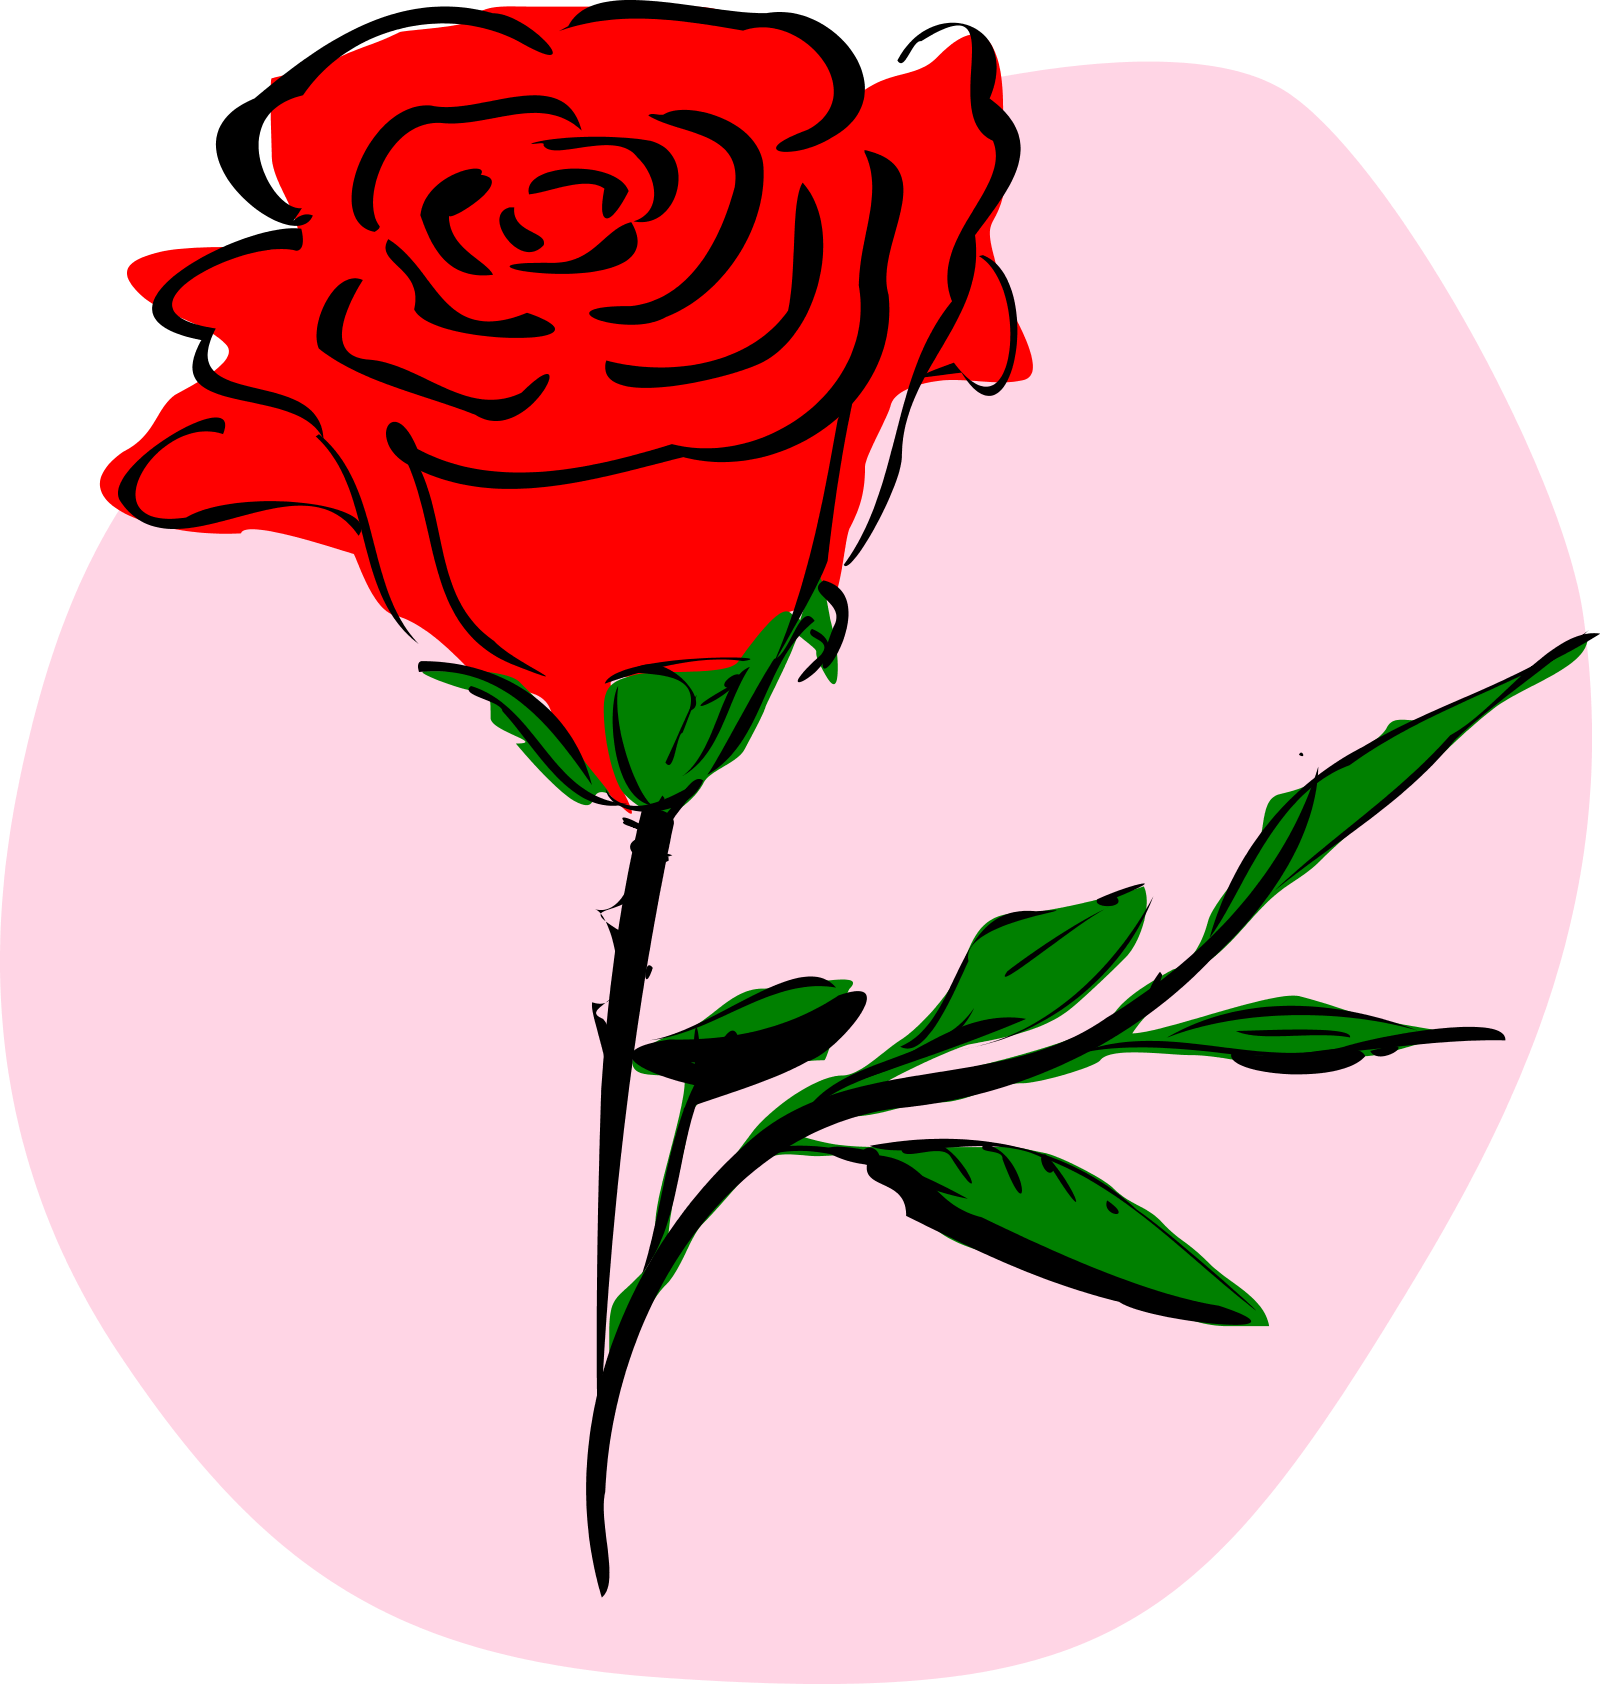 Rose.png - Clipart library